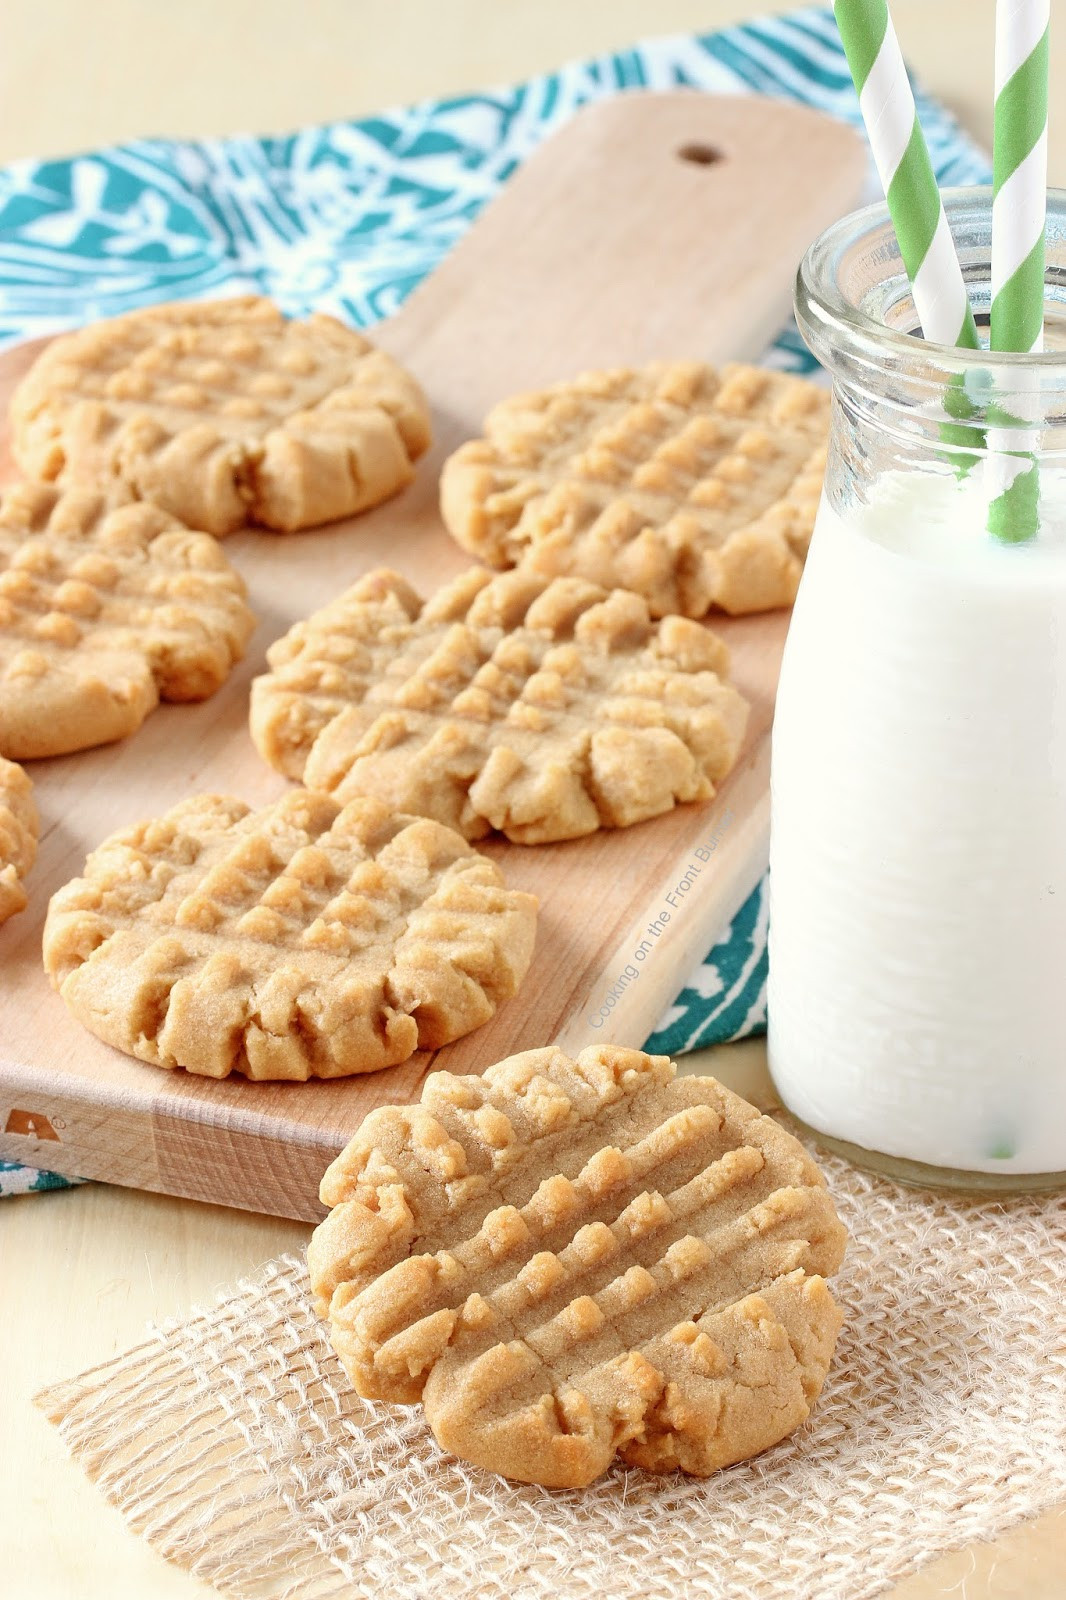 Peanut Butter Cookies Allrecipes
 OLD FASHIONED PEANUT BUTTER COOKIES